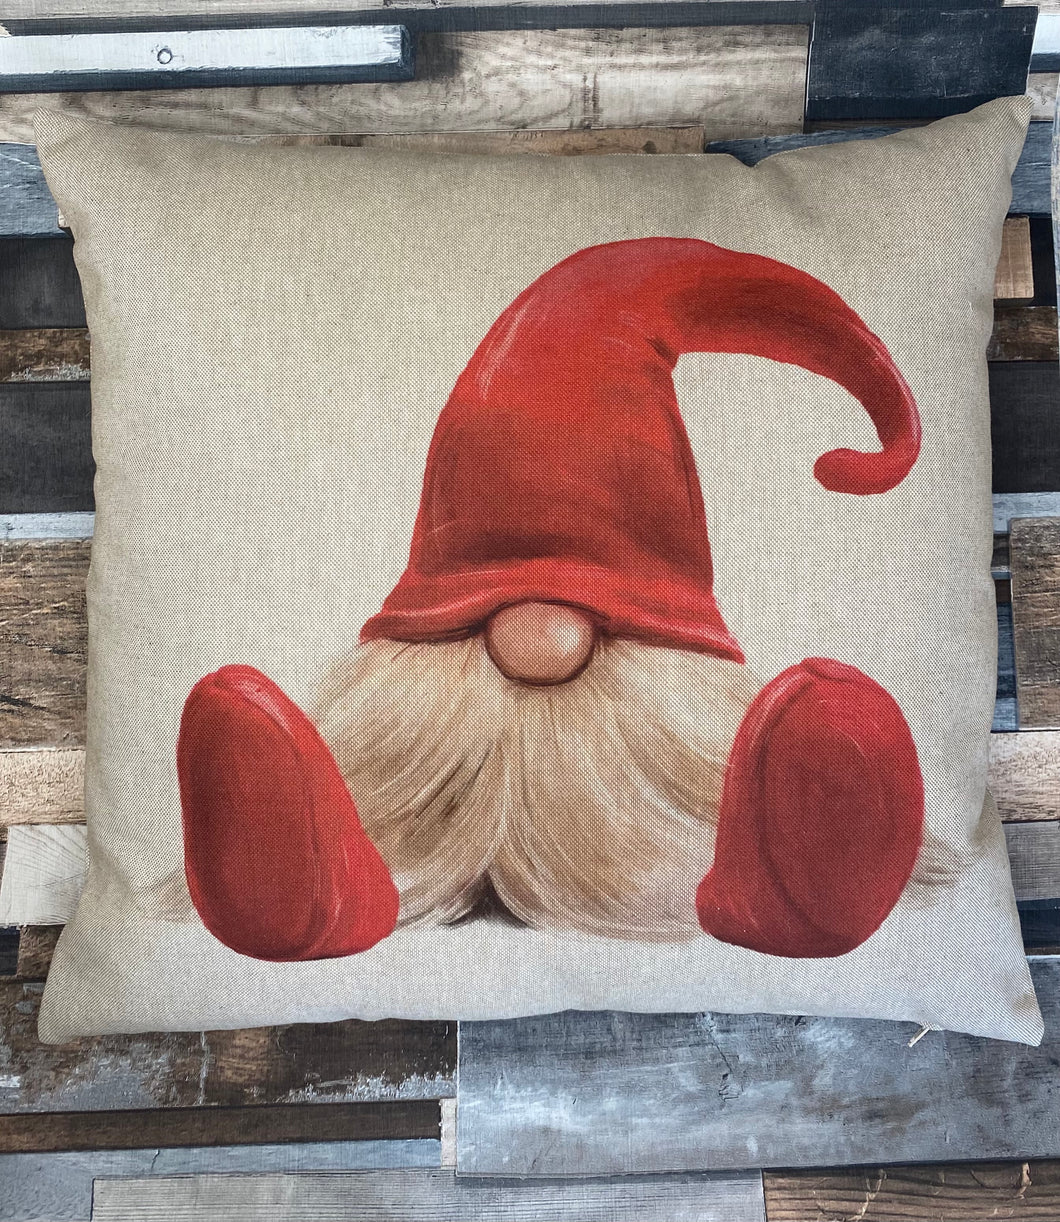 Gonk Cushion, Christmas, Scandanavian Elf, Red - Butterfly Crafts